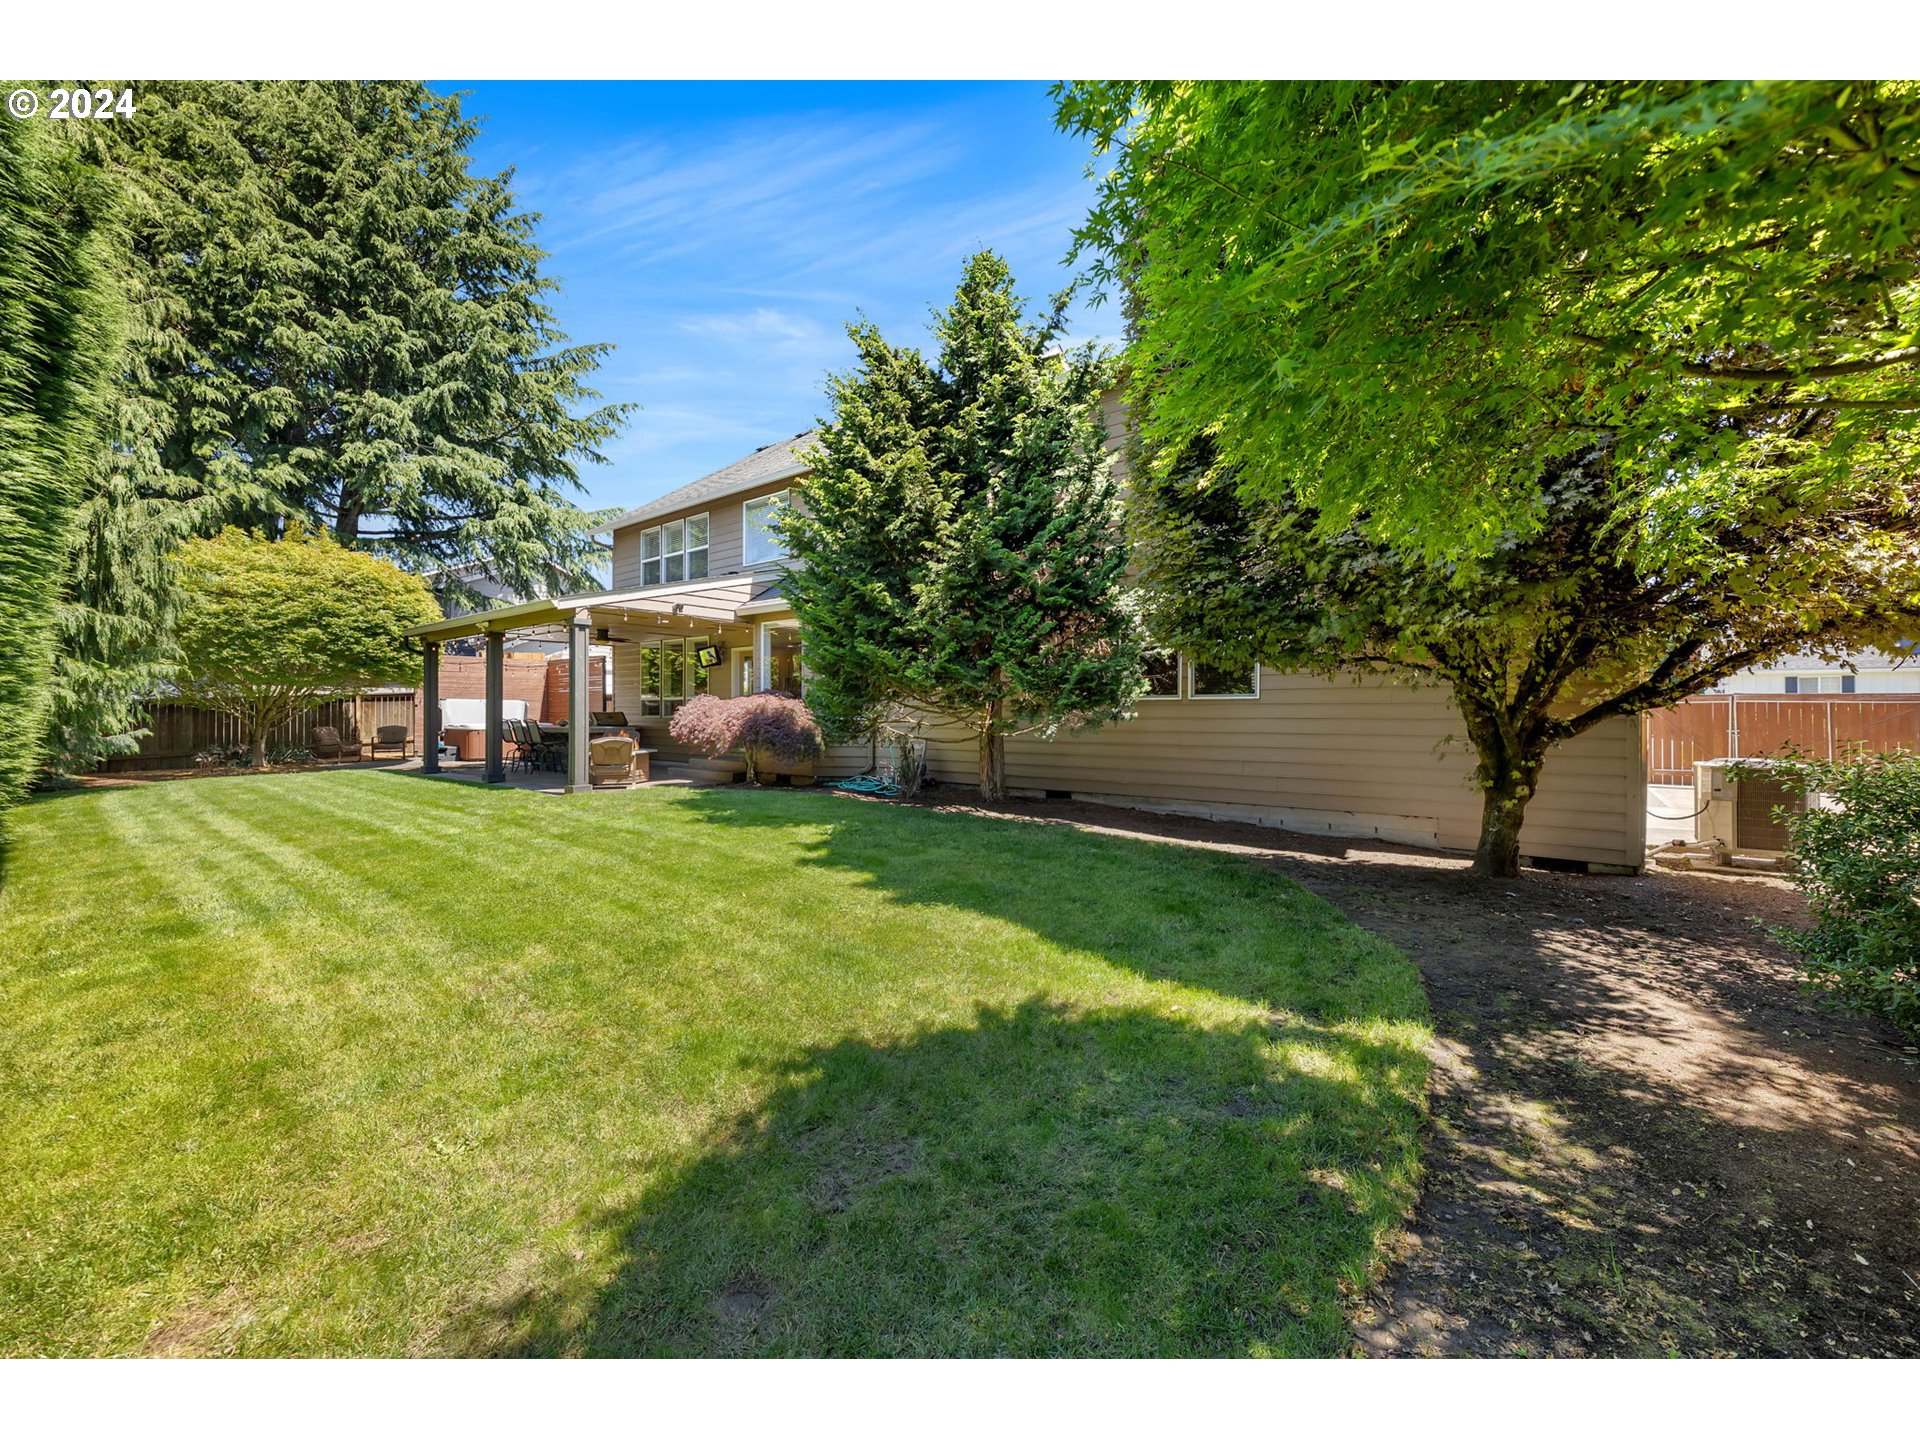 12412 NW 47th Ave, Vancouver, WA 98685